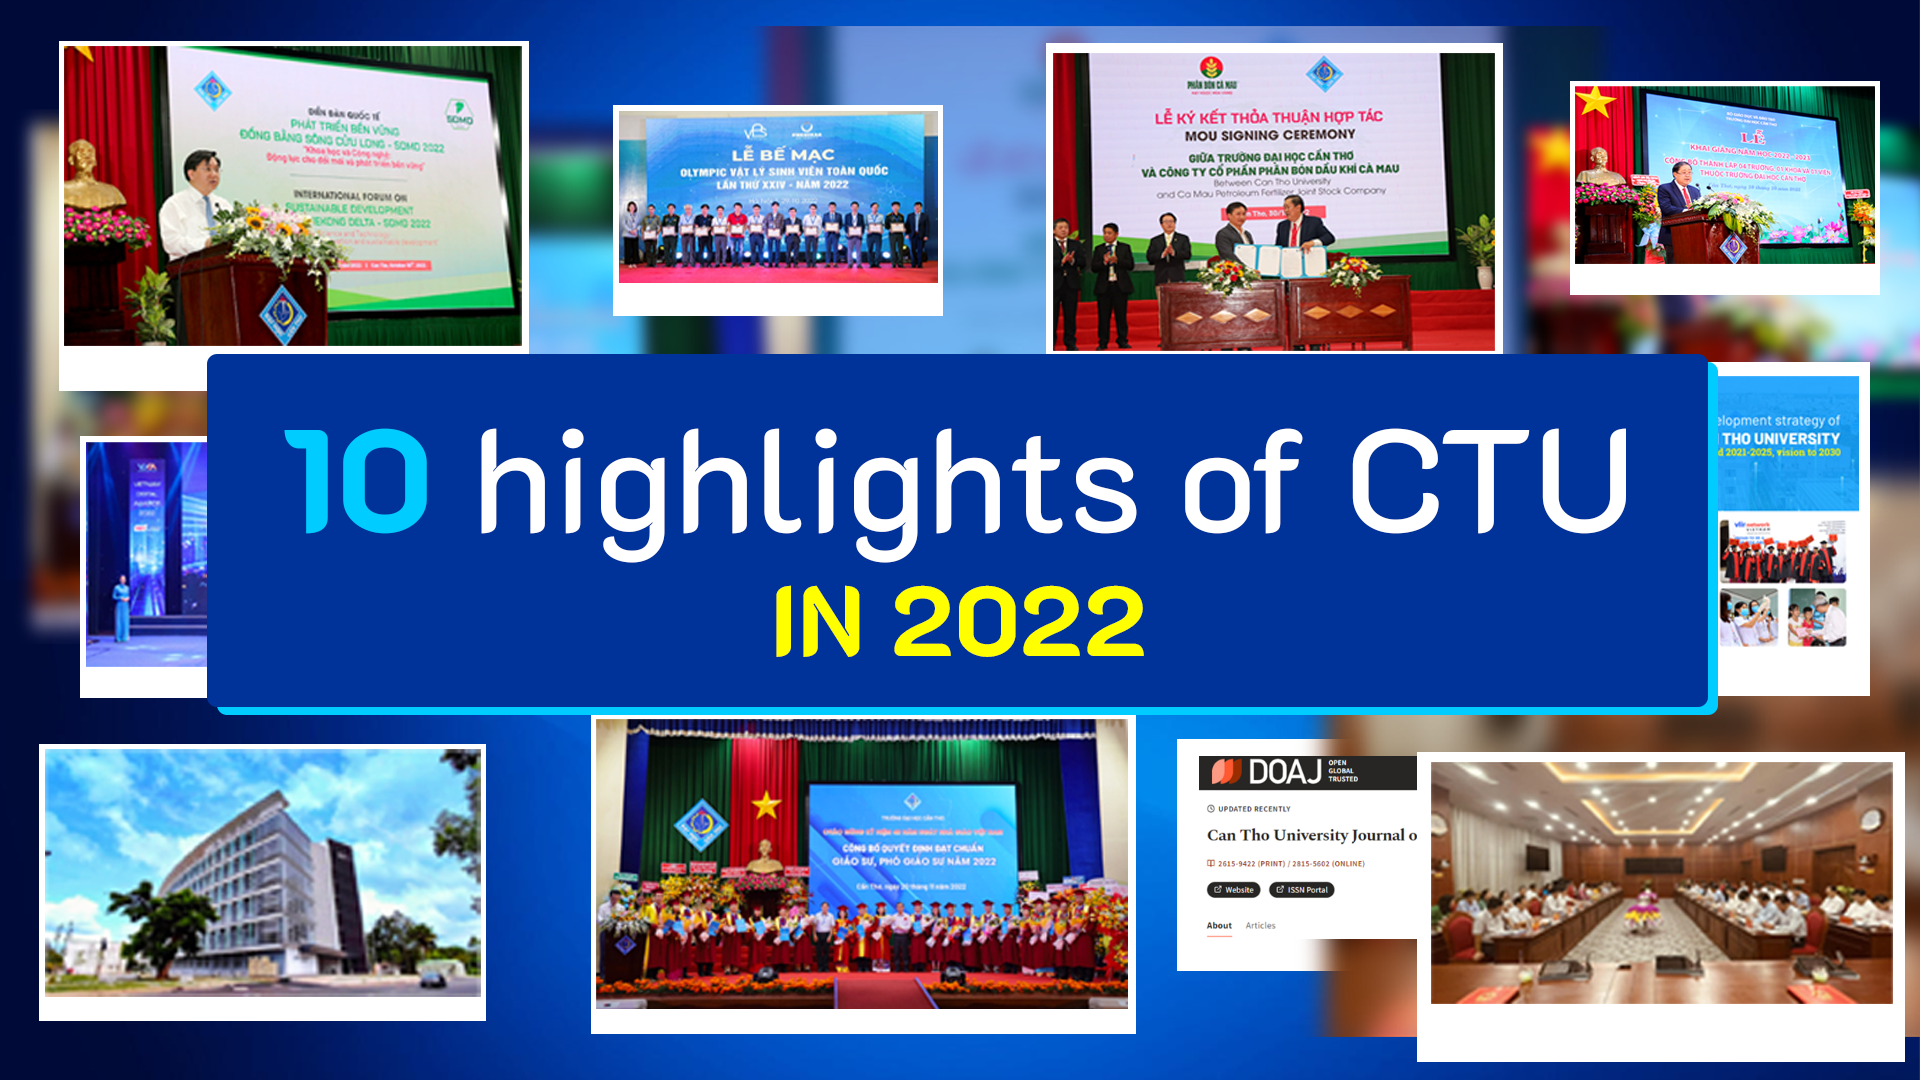  Can Tho University’s 10 highlights in 2022